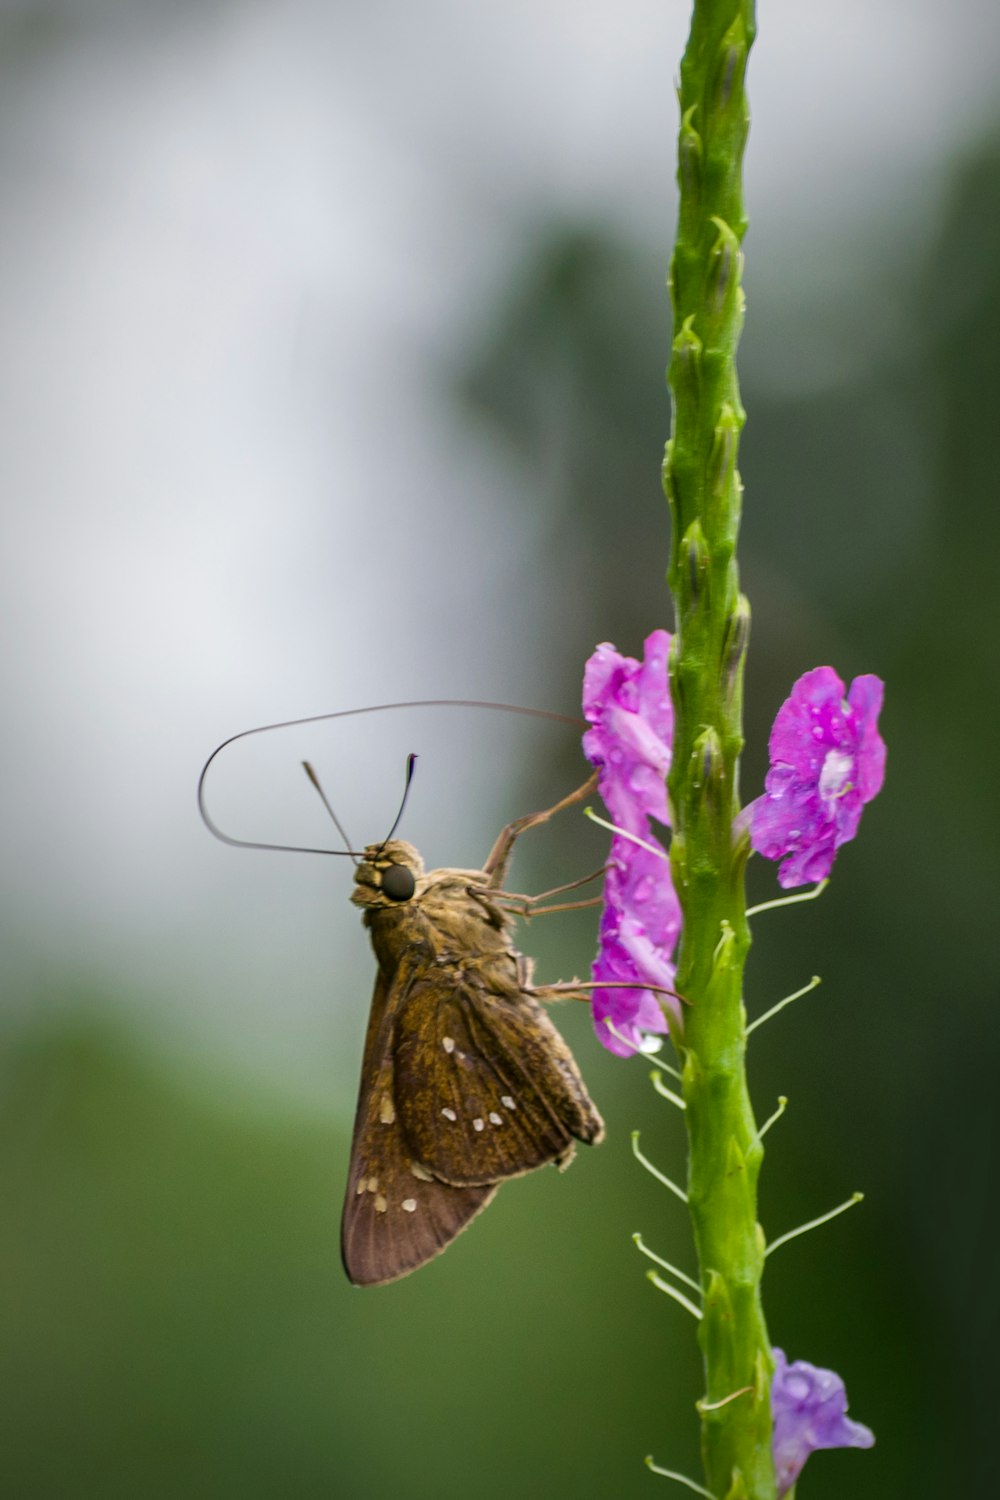 brown moth perched on purple flower in close up photography during daytime